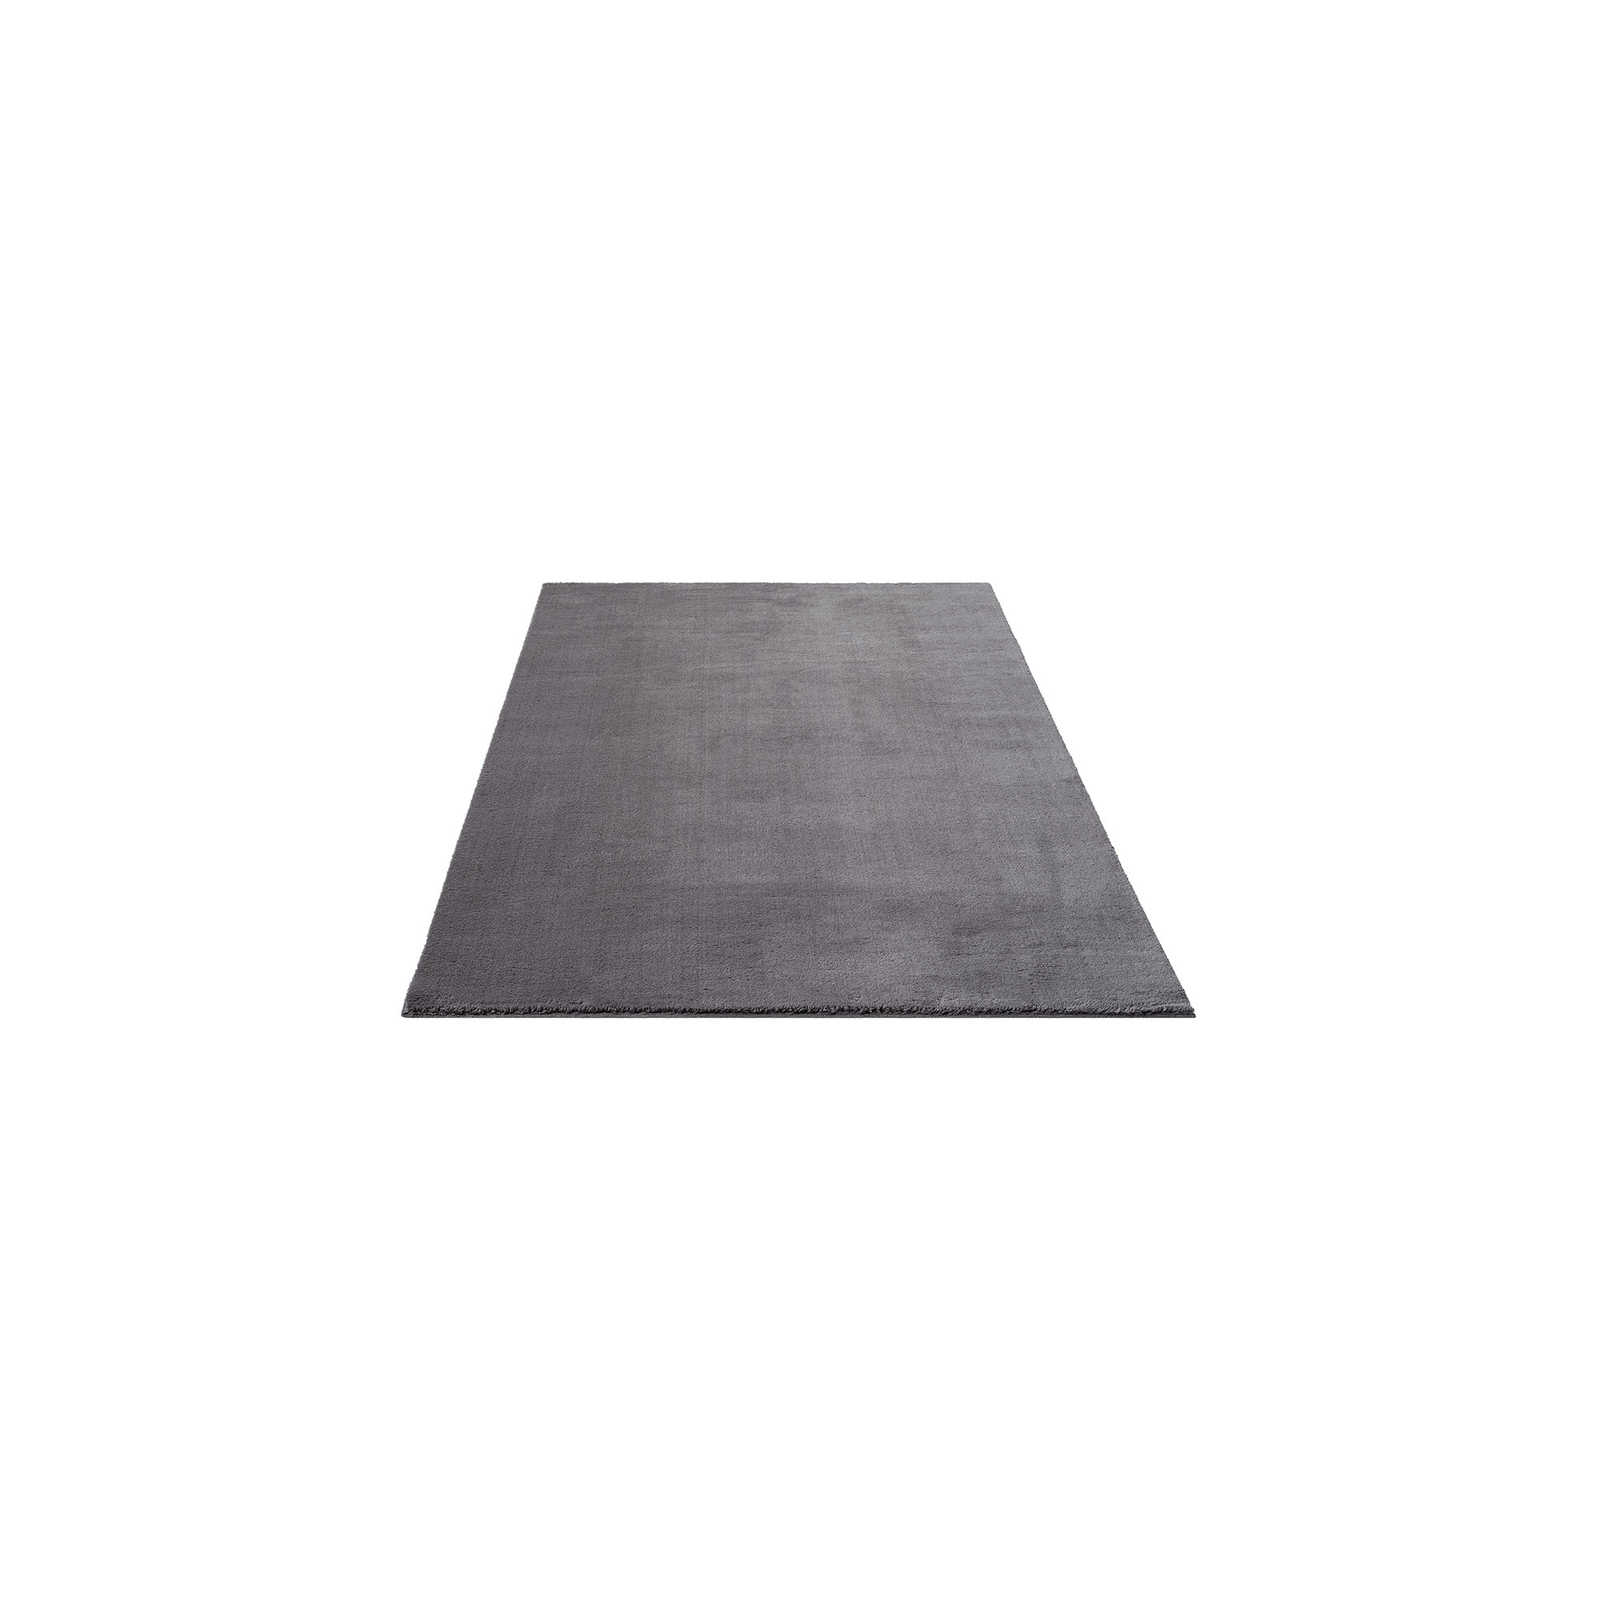 Fluffy high pile carpet in anthracite - 170 x 120 cm
